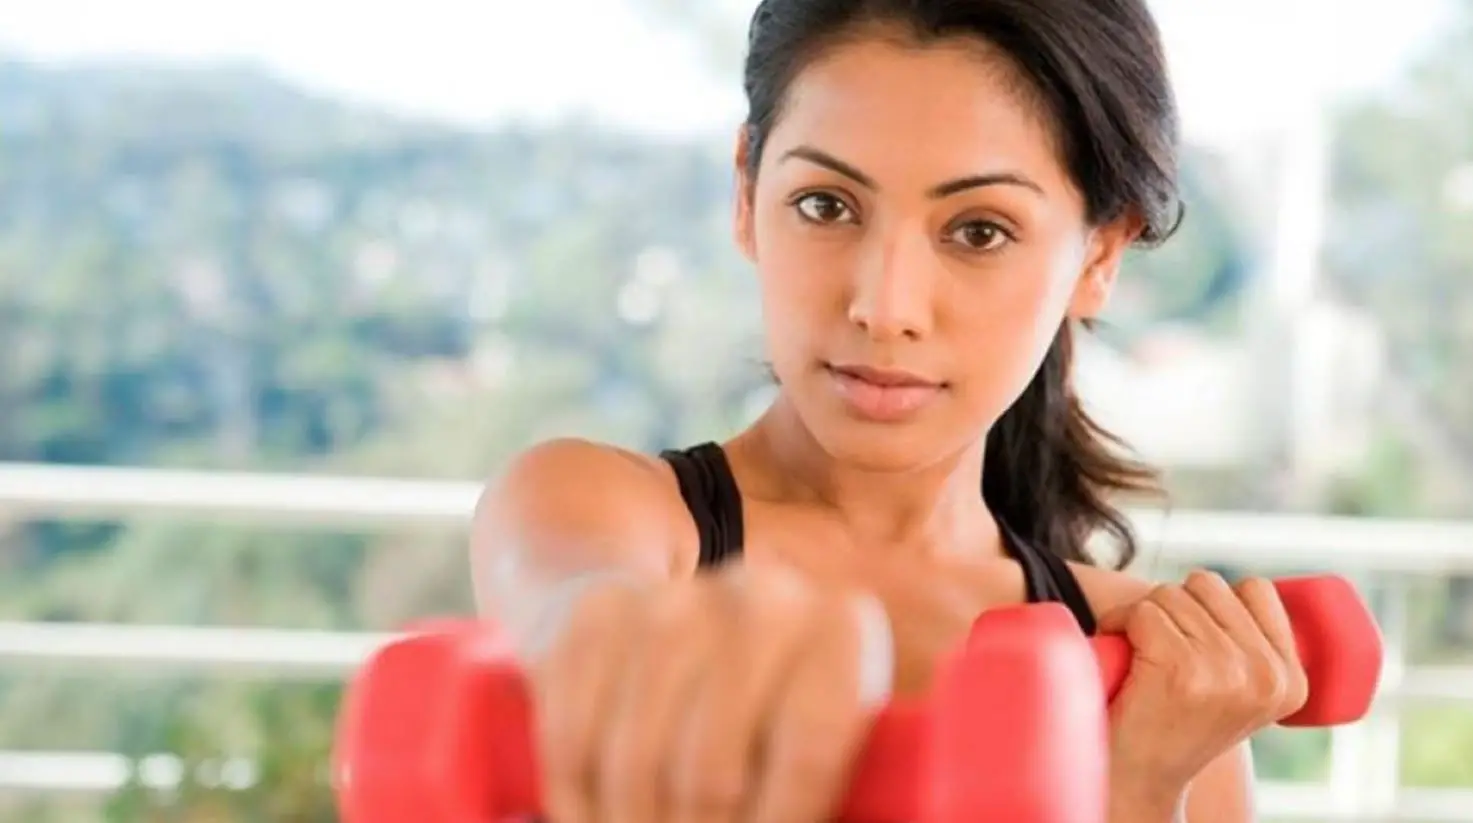 Shadow Boxing With Weights For Fat Loss